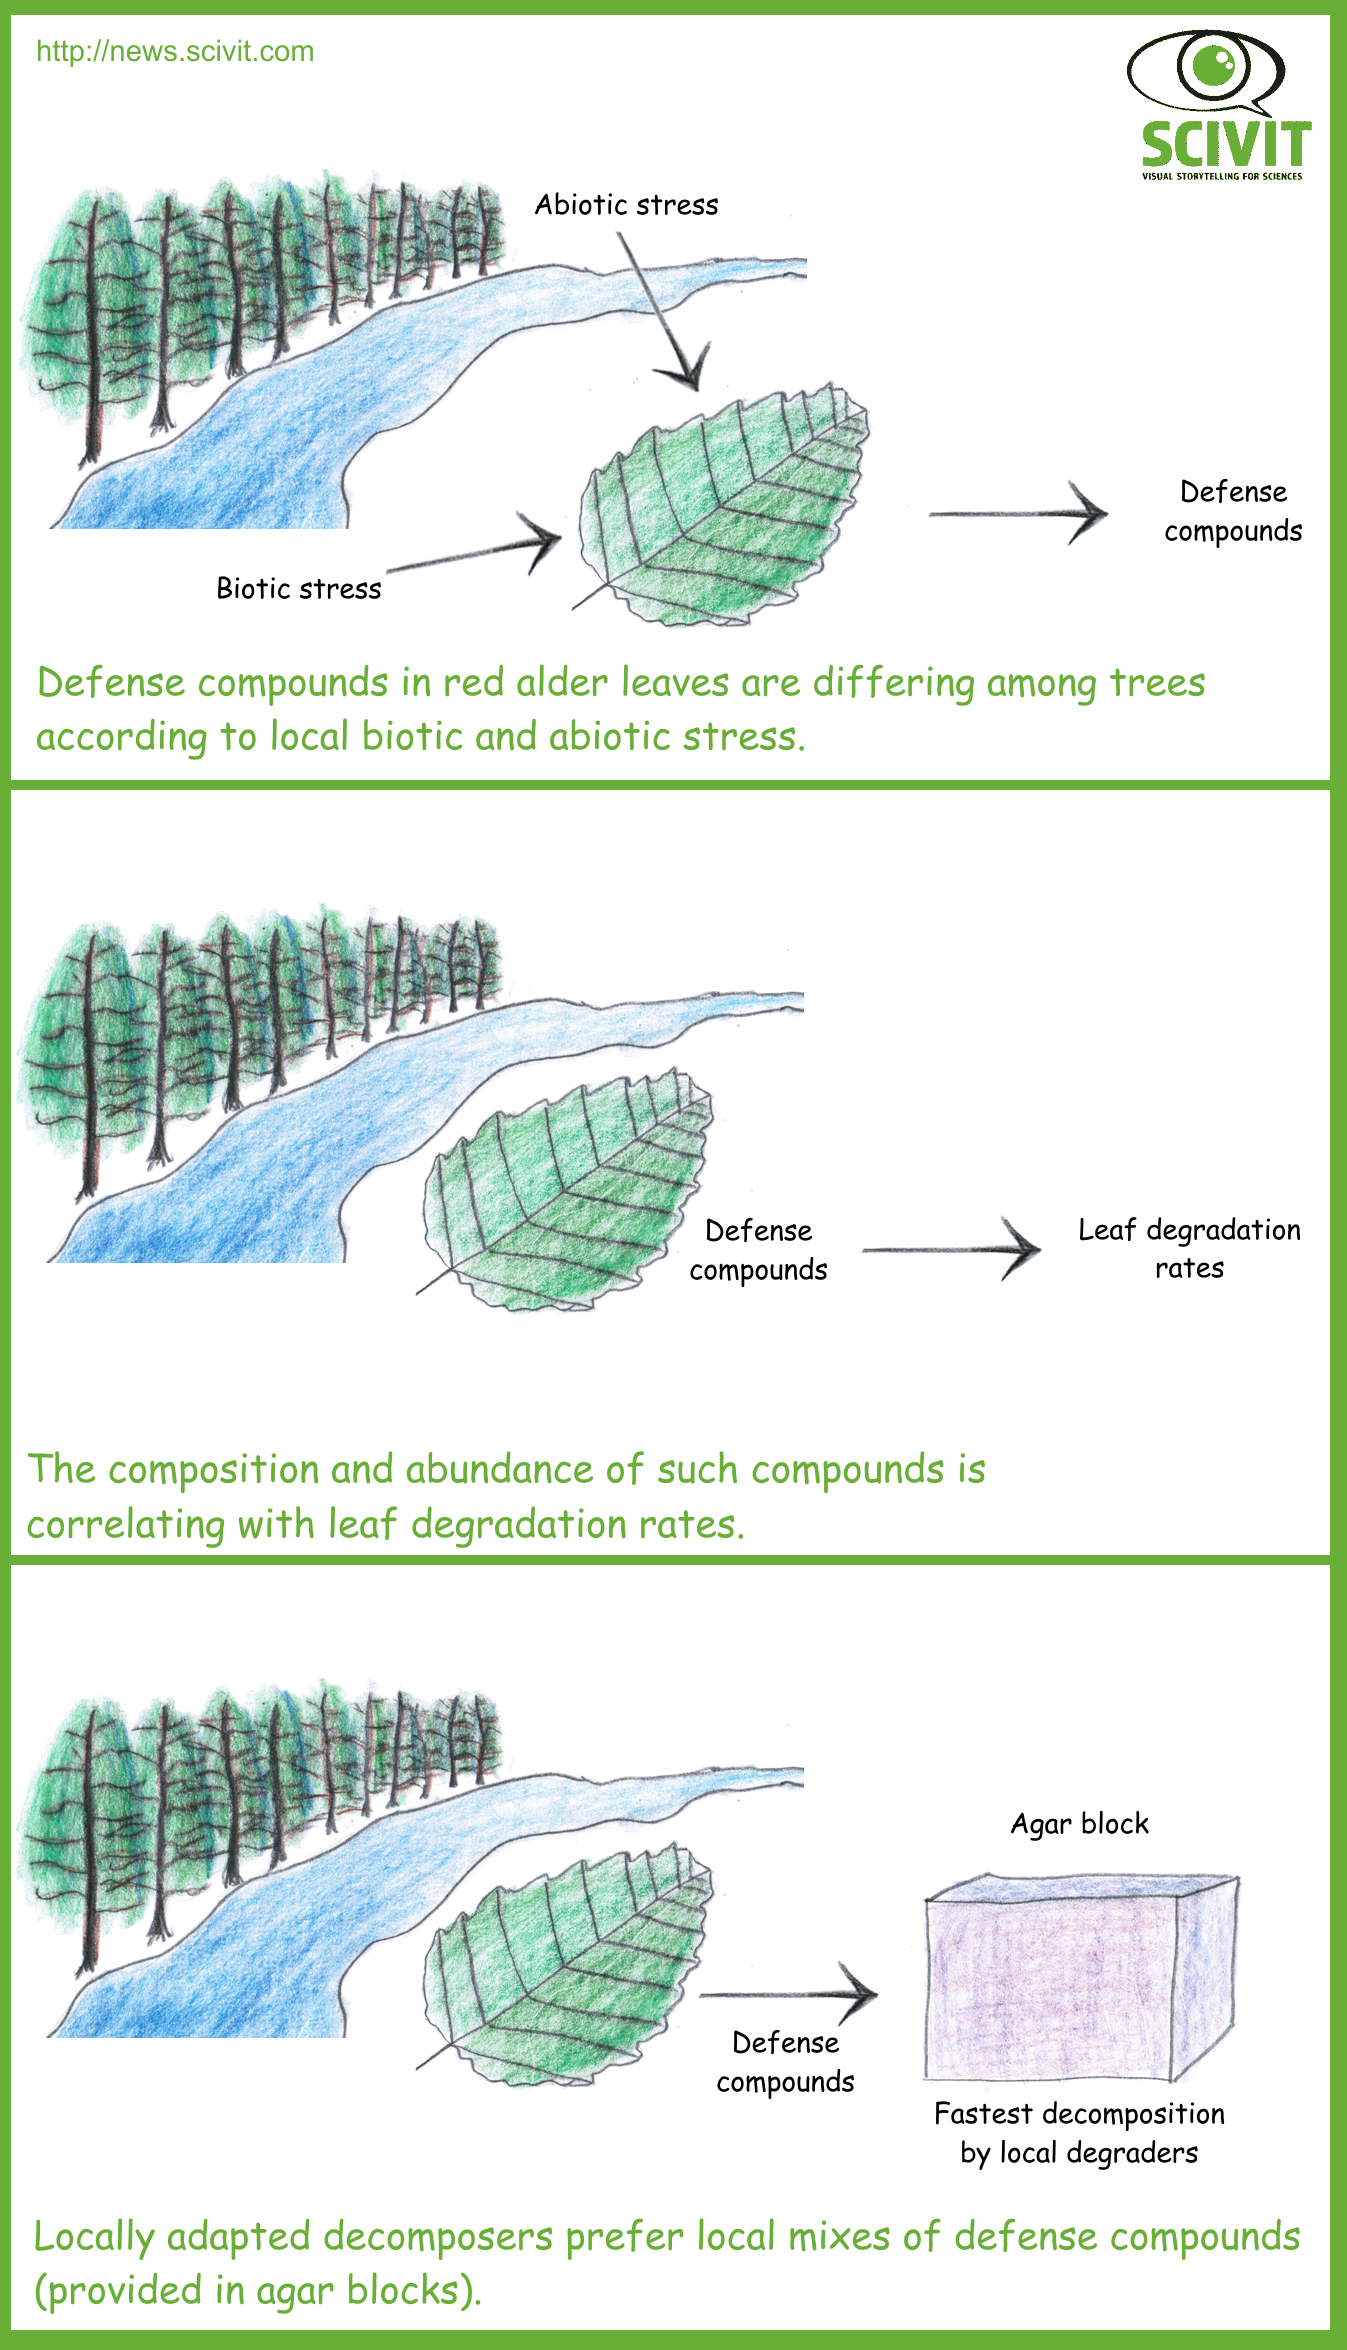 To which extent are leaf defense compounds driving leaf decomposing organisms?